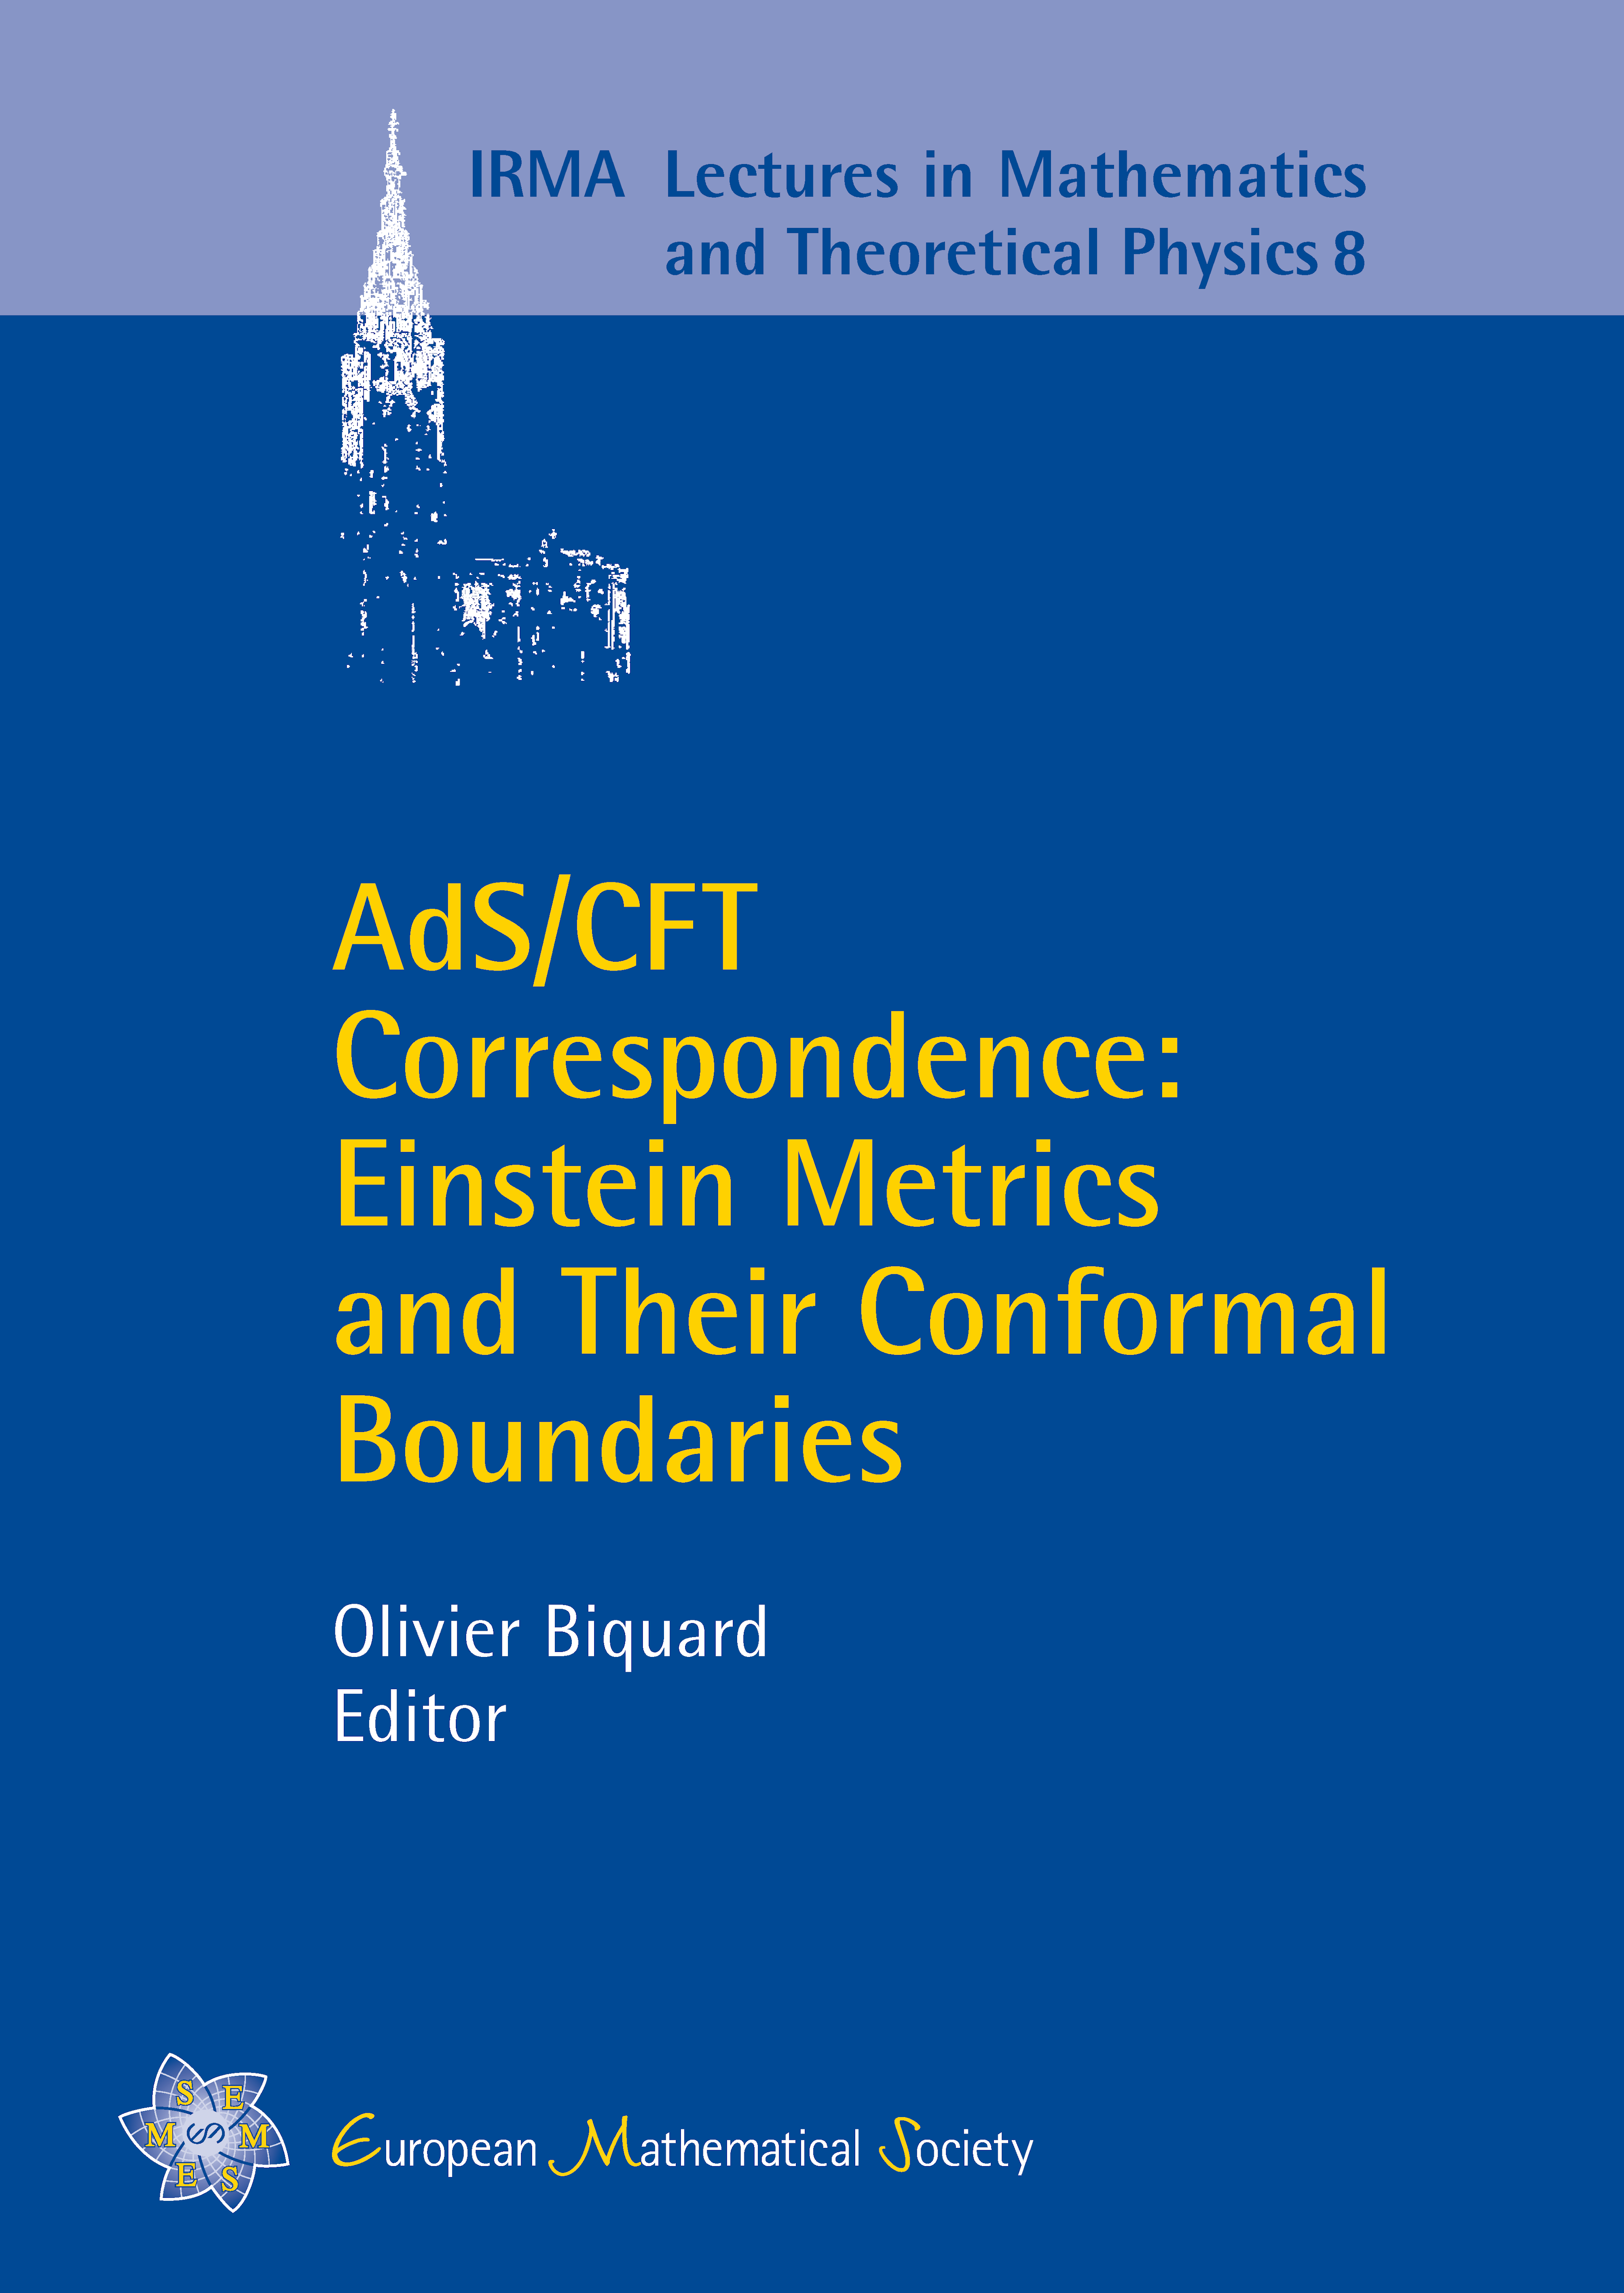 AdS/CFT correspondence and geometry cover